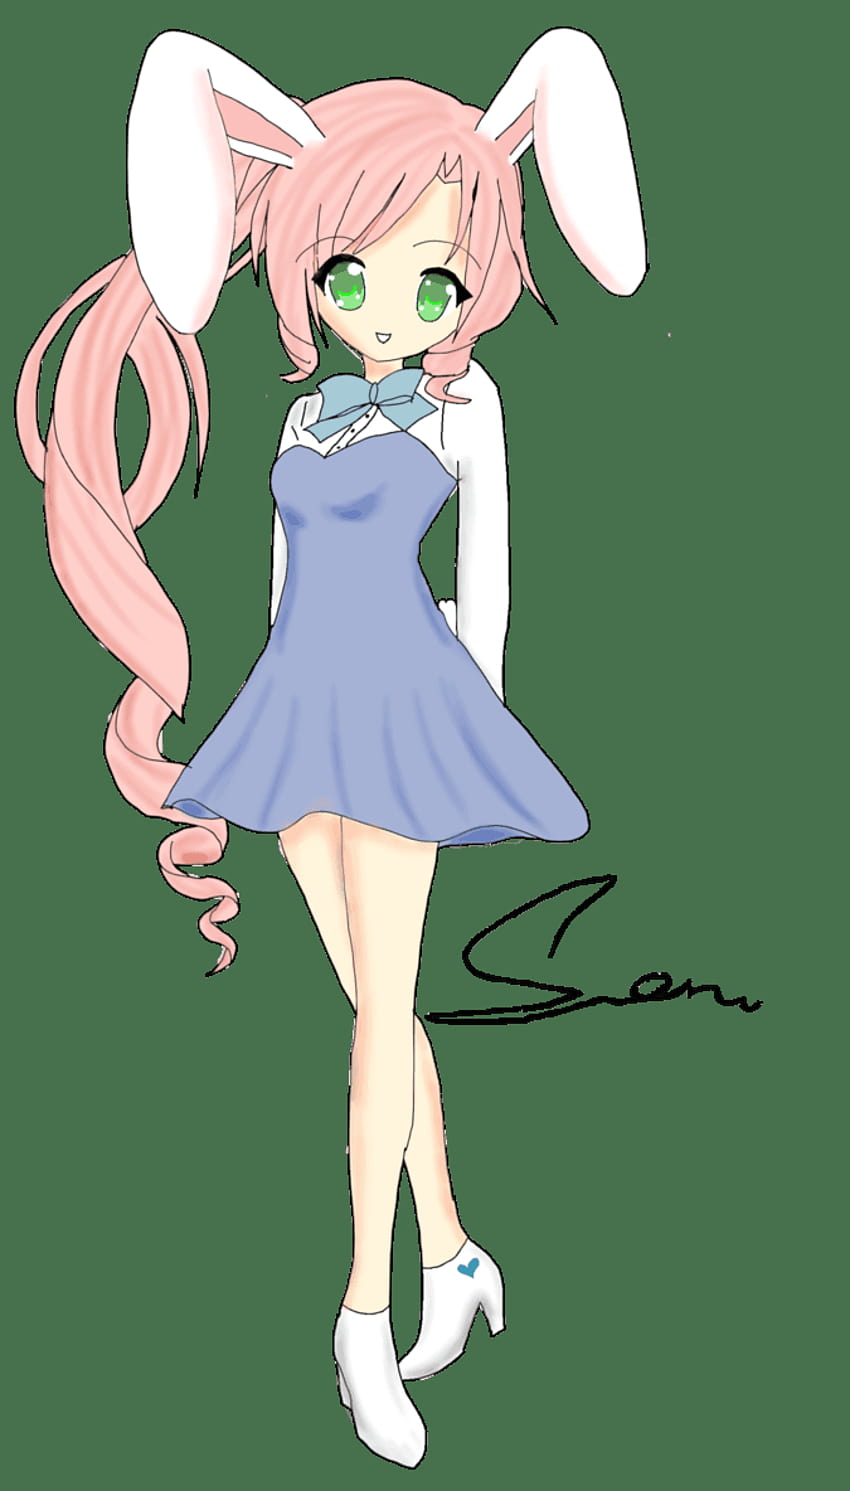 Share more than 143 anime bunny characters latest - in.eteachers